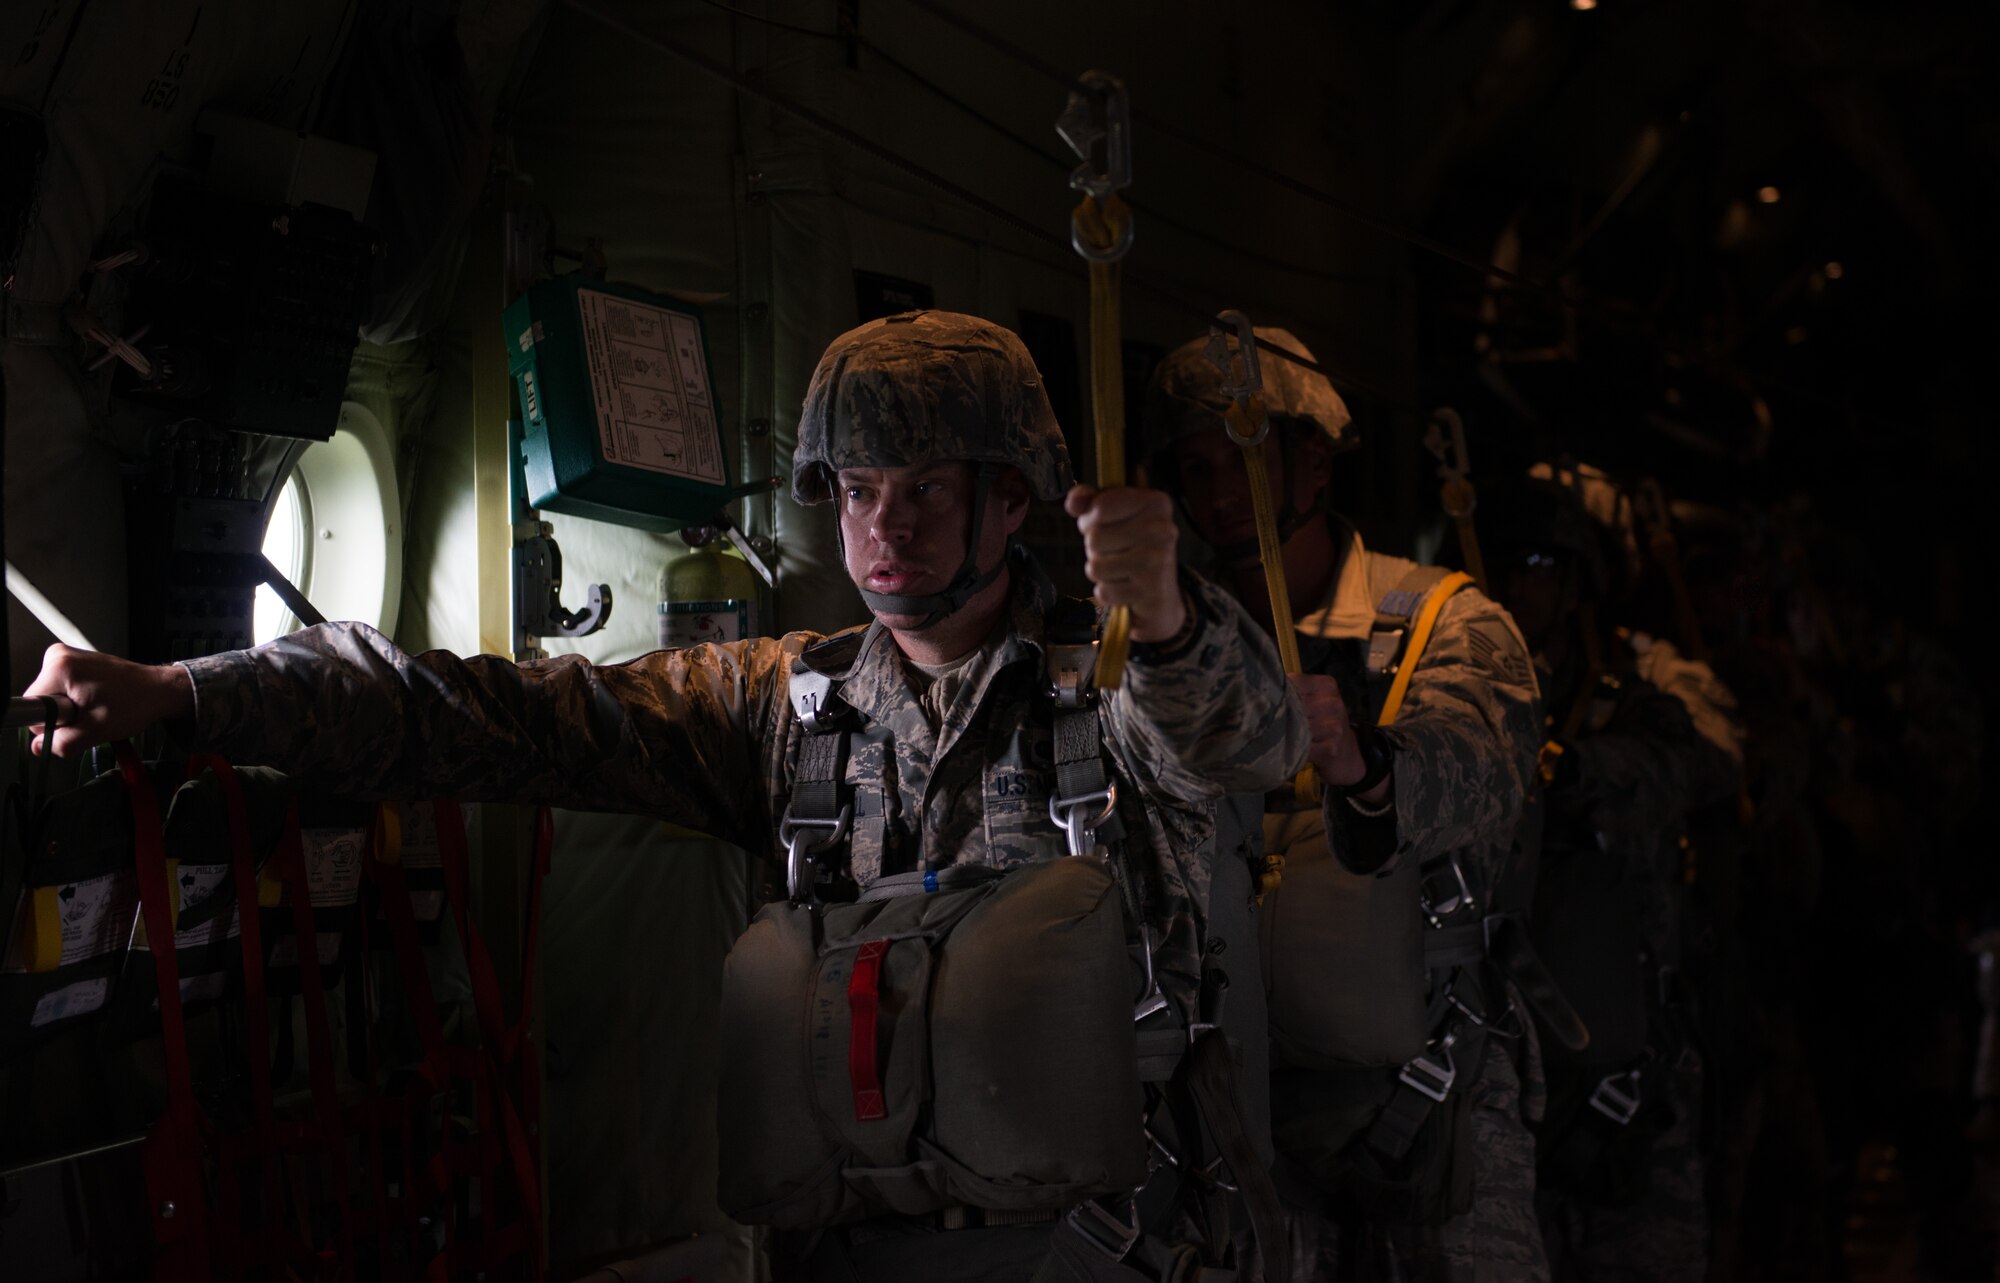 Tech. Sgt. Brian Angell waits to jump out of a C-130J Hercules during the Air Force-specific portion of Saber Strike June 17, 2014, on Lielvarde Air Base, Latvia. During the final week of Saber Strike 2014 the 435th Contingency Response Group, in conjunction with the 37th Airlift Squadron, trained on the full capabilities to open the Latvian air base. They also trained with Latvian and Estonian service members on airfield operations, command and control of air and space forces, weather support, and protection of operational forces, aircraft maintenance, and aerial port services. Angell is the 435th CRG personnel parachute program manager. (U.S. Air Force photo/Senior Airman Jonathan Stefanko)